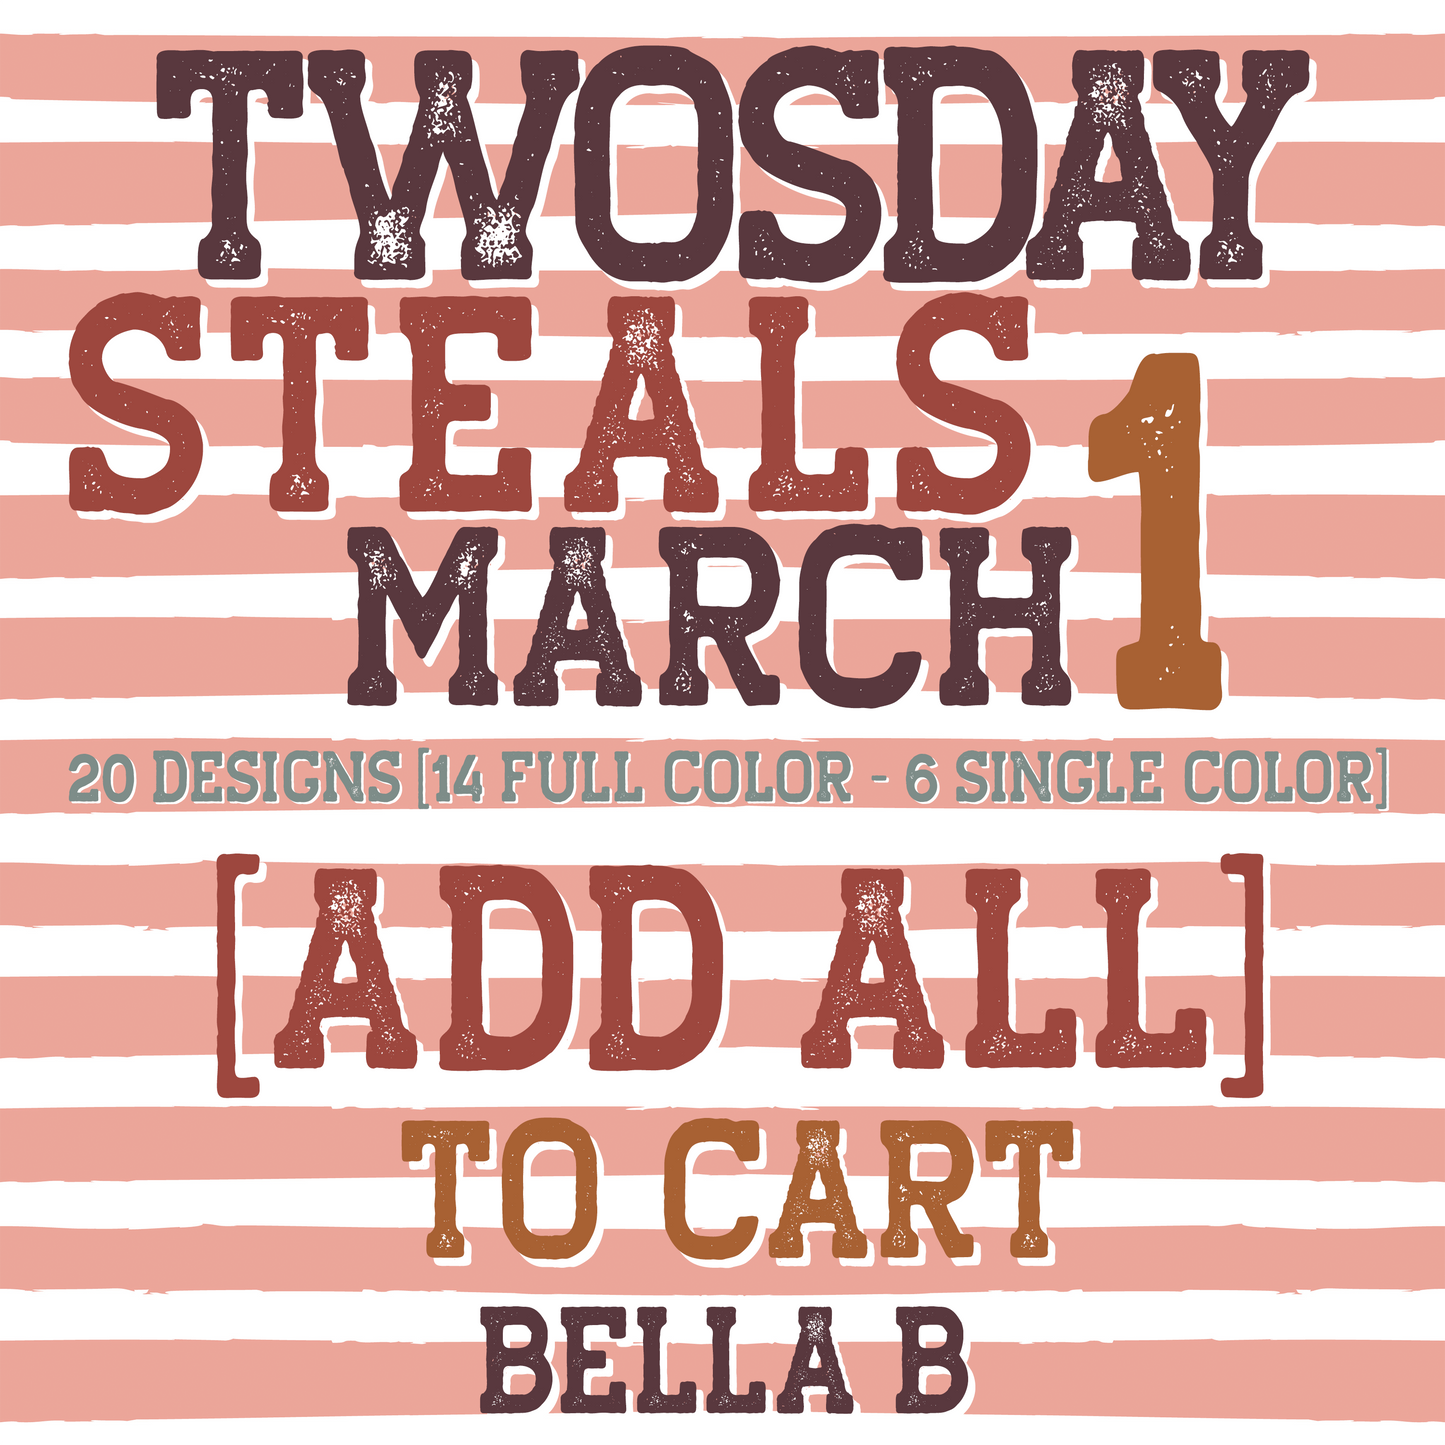 TWOSDAY STEALS March 1 - Add ALL To Cart